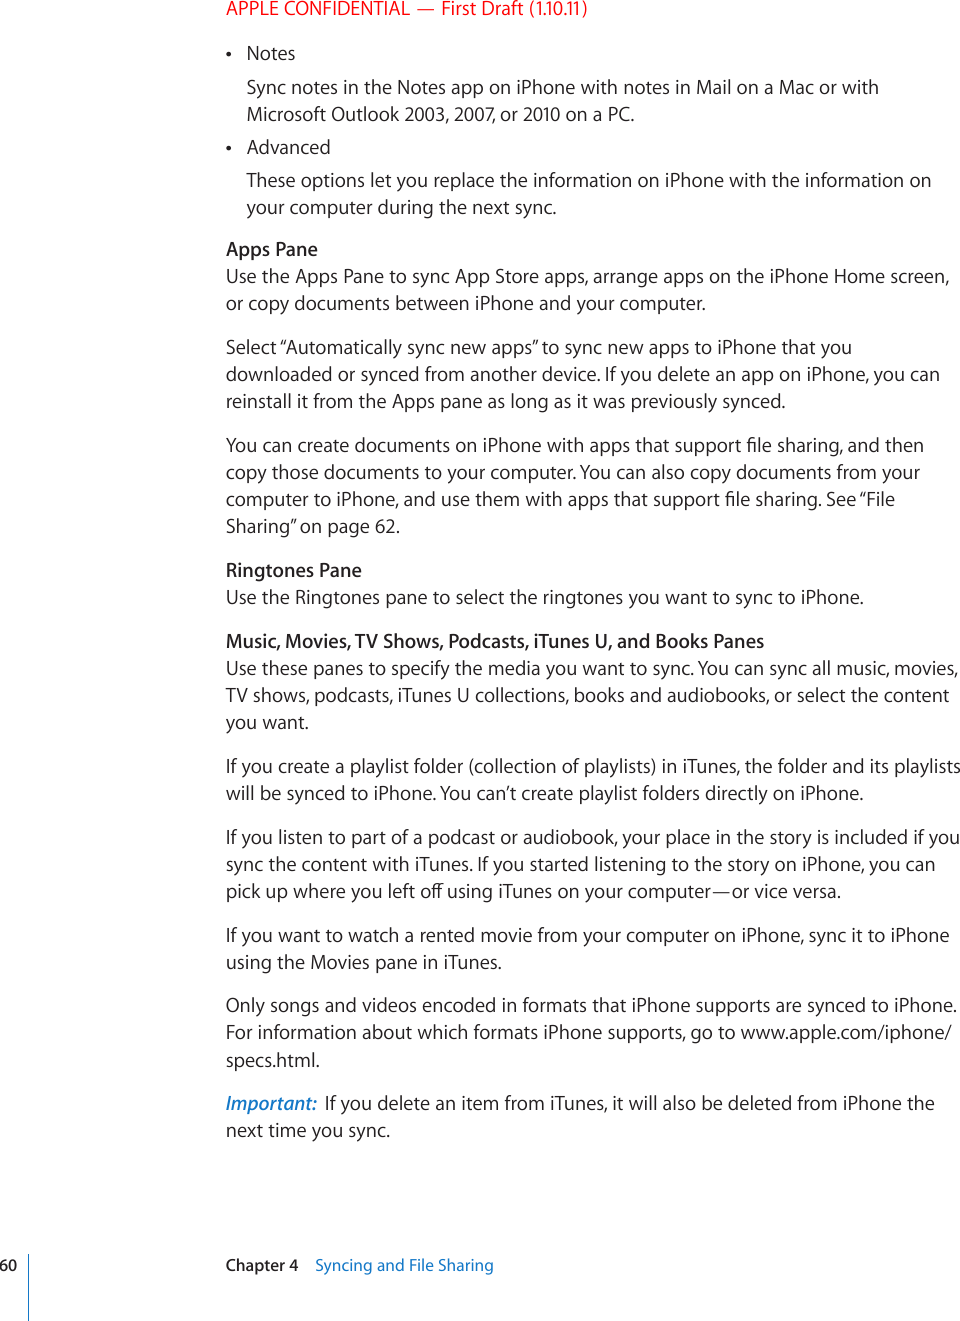 APPLE CONFIDENTIAL — First Draft (1.10.11)Notes Sync notes in the Notes app on iPhone with notes in Mail on a Mac or with Microsoft Outlook 2003, 2007, or 2010 on a PC.Advanced These options let you replace the information on iPhone with the information on your computer during the next sync.Apps PaneUse the Apps Pane to sync App Store apps, arrange apps on the iPhone Home screen, or copy documents between iPhone and your computer.Select “Automatically sync new apps” to sync new apps to iPhone that you downloaded or synced from another device. If you delete an app on iPhone, you can reinstall it from the Apps pane as long as it was previously synced.;QWECPETGCVGFQEWOGPVUQPK2JQPGYKVJCRRUVJCVUWRRQTV°NGUJCTKPICPFVJGPcopy those documents to your computer. You can also copy documents from your EQORWVGTVQK2JQPGCPFWUGVJGOYKVJCRRUVJCVUWRRQTV°NGUJCTKPI5GG¥File Sharing” on page 62.Ringtones PaneUse the Ringtones pane to select the ringtones you want to sync to iPhone.Music, Movies, TV Shows, Podcasts, iTunes U, and Books PanesUse these panes to specify the media you want to sync. You can sync all music, movies, TV shows, podcasts, iTunes U collections, books and audiobooks, or select the content you want.If you create a playlist folder (collection of playlists) in iTunes, the folder and its playlists will be synced to iPhone. You can’t create playlist folders directly on iPhone. If you listen to part of a podcast or audiobook, your place in the story is included if you sync the content with iTunes. If you started listening to the story on iPhone, you can RKEMWRYJGTG[QWNGHVQÒWUKPIK6WPGUQP[QWTEQORWVGT¤QTXKEGXGTUCIf you want to watch a rented movie from your computer on iPhone, sync it to iPhone using the Movies pane in iTunes.Only songs and videos encoded in formats that iPhone supports are synced to iPhone. For information about which formats iPhone supports, go to www.apple.com/iphone/specs.html.Important:  If you delete an item from iTunes, it will also be deleted from iPhone the next time you sync.60 Chapter 4    Syncing and File Sharing